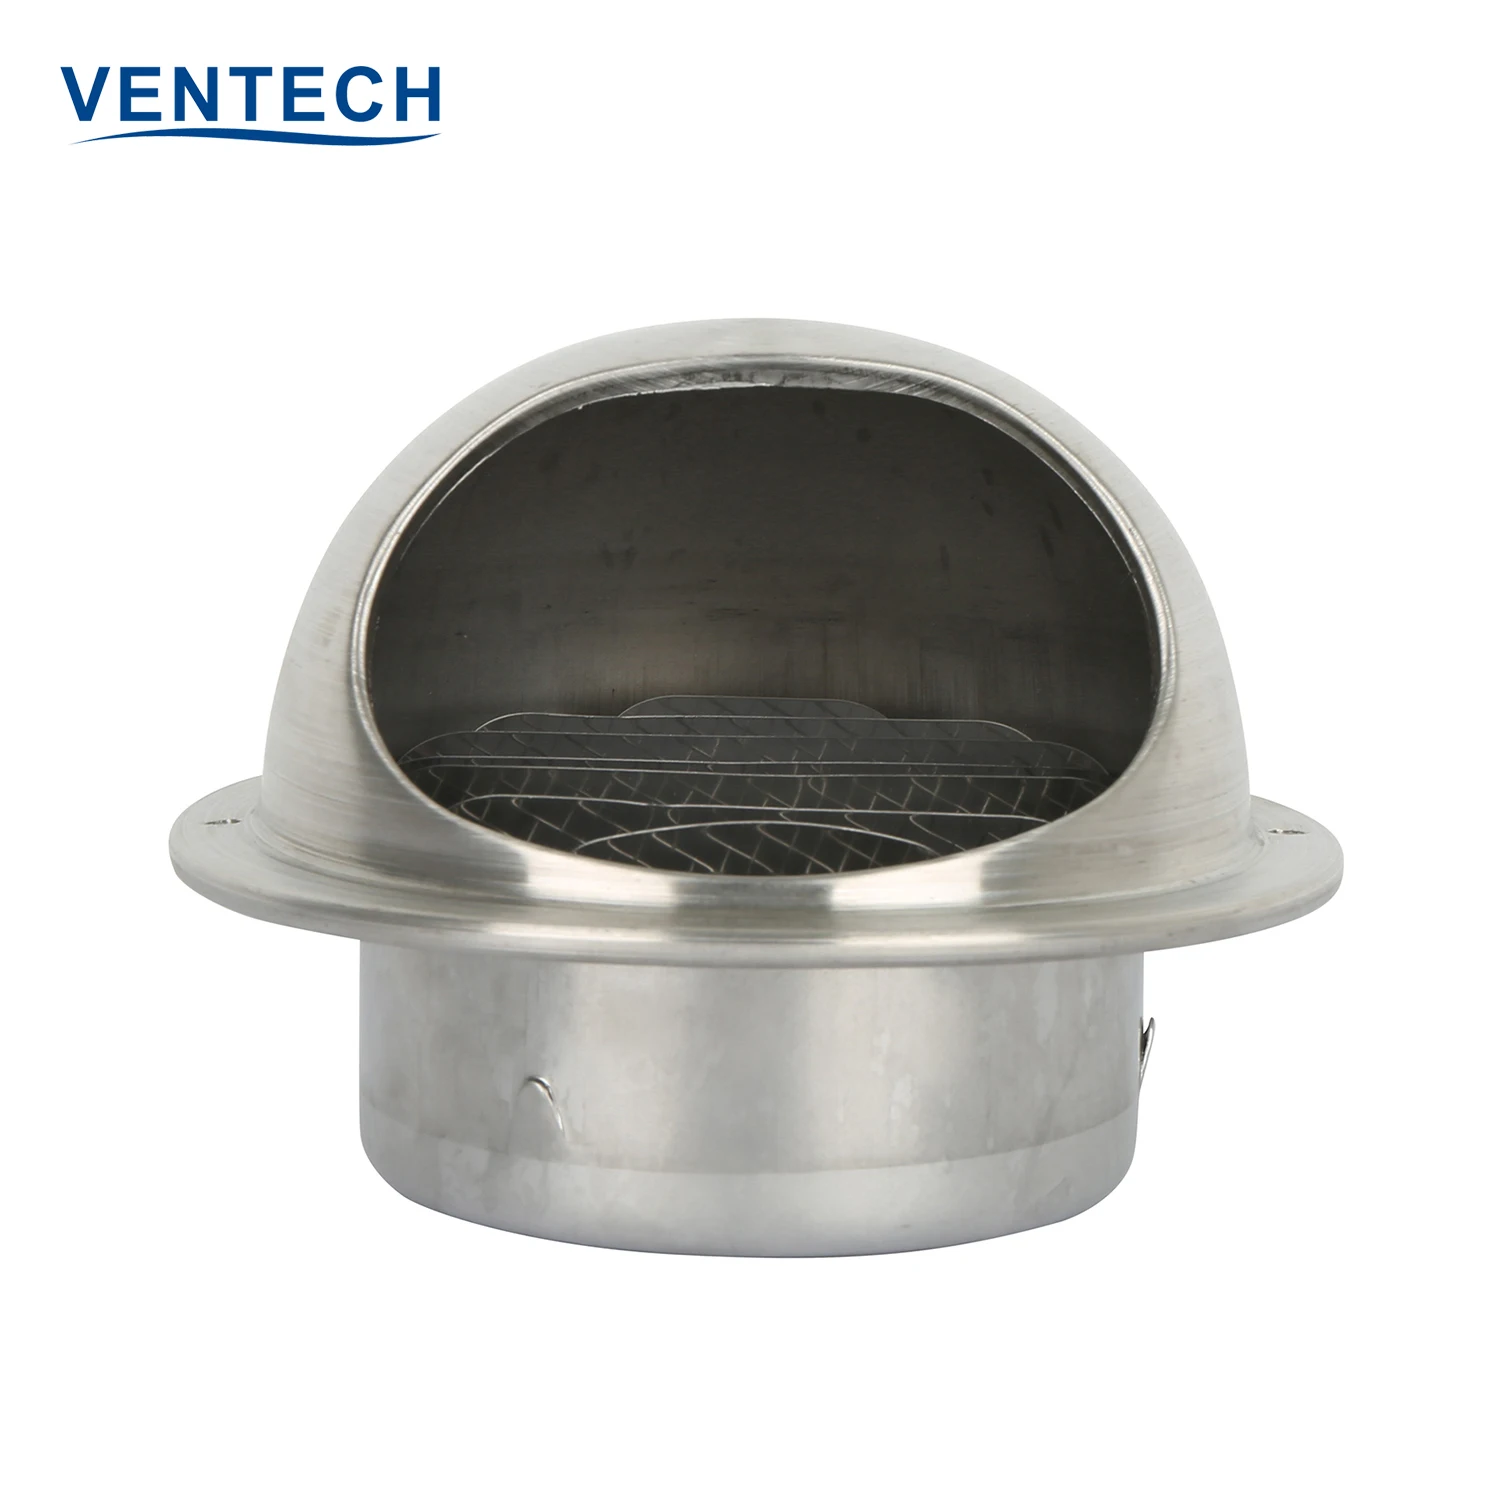 Hvac System Metal Wall Vents External Outside Air Vent For Ventilation